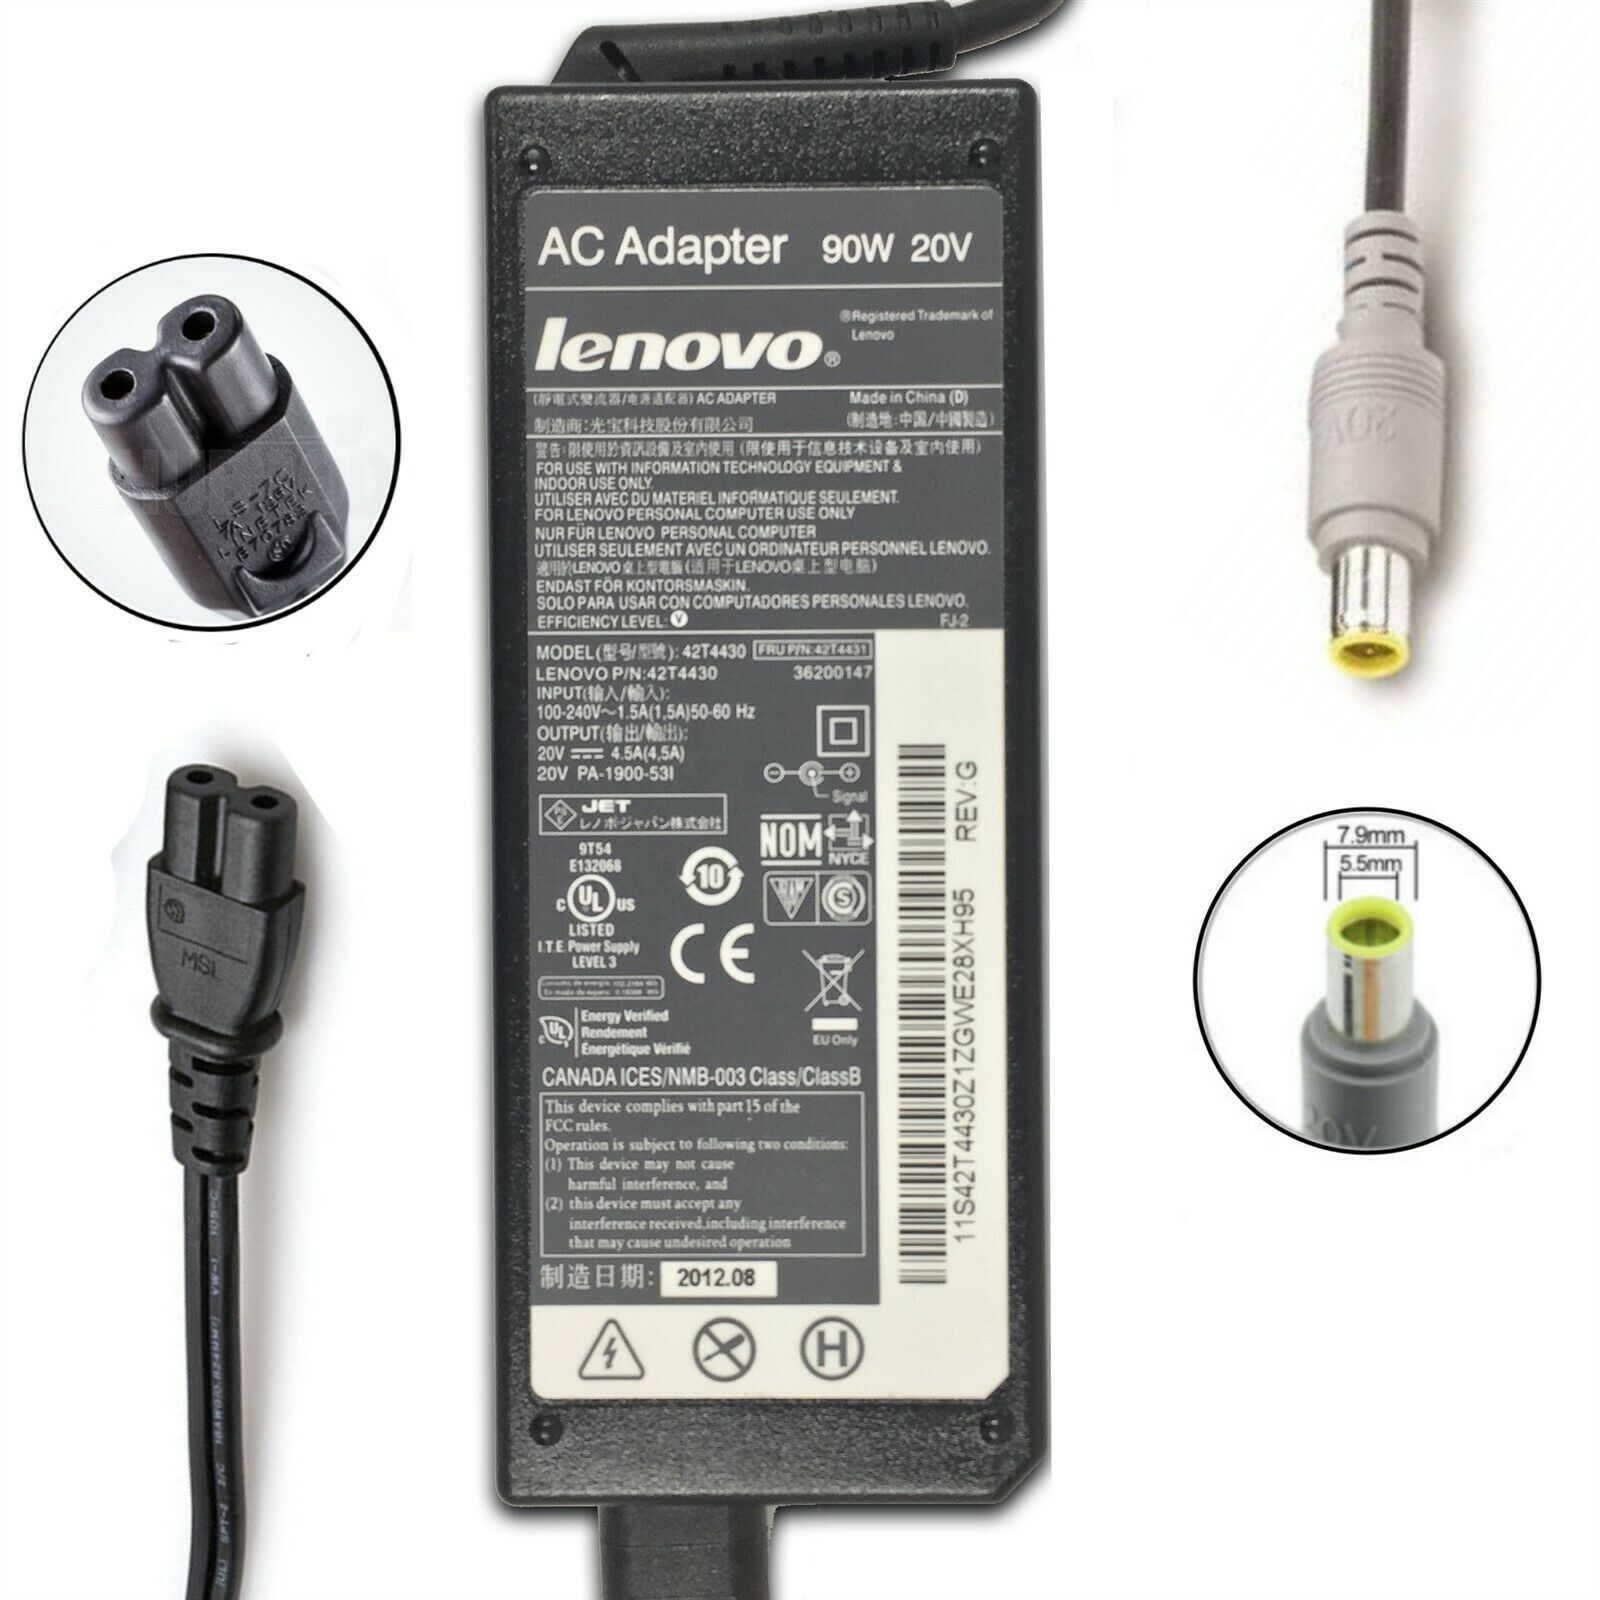 Genuine Lenovo ThinkPad Laptop AC Charger Power Adapter 90W 20V 4.5A ROUND TIP Seller Notes: “Includes: ROUND Tip AC